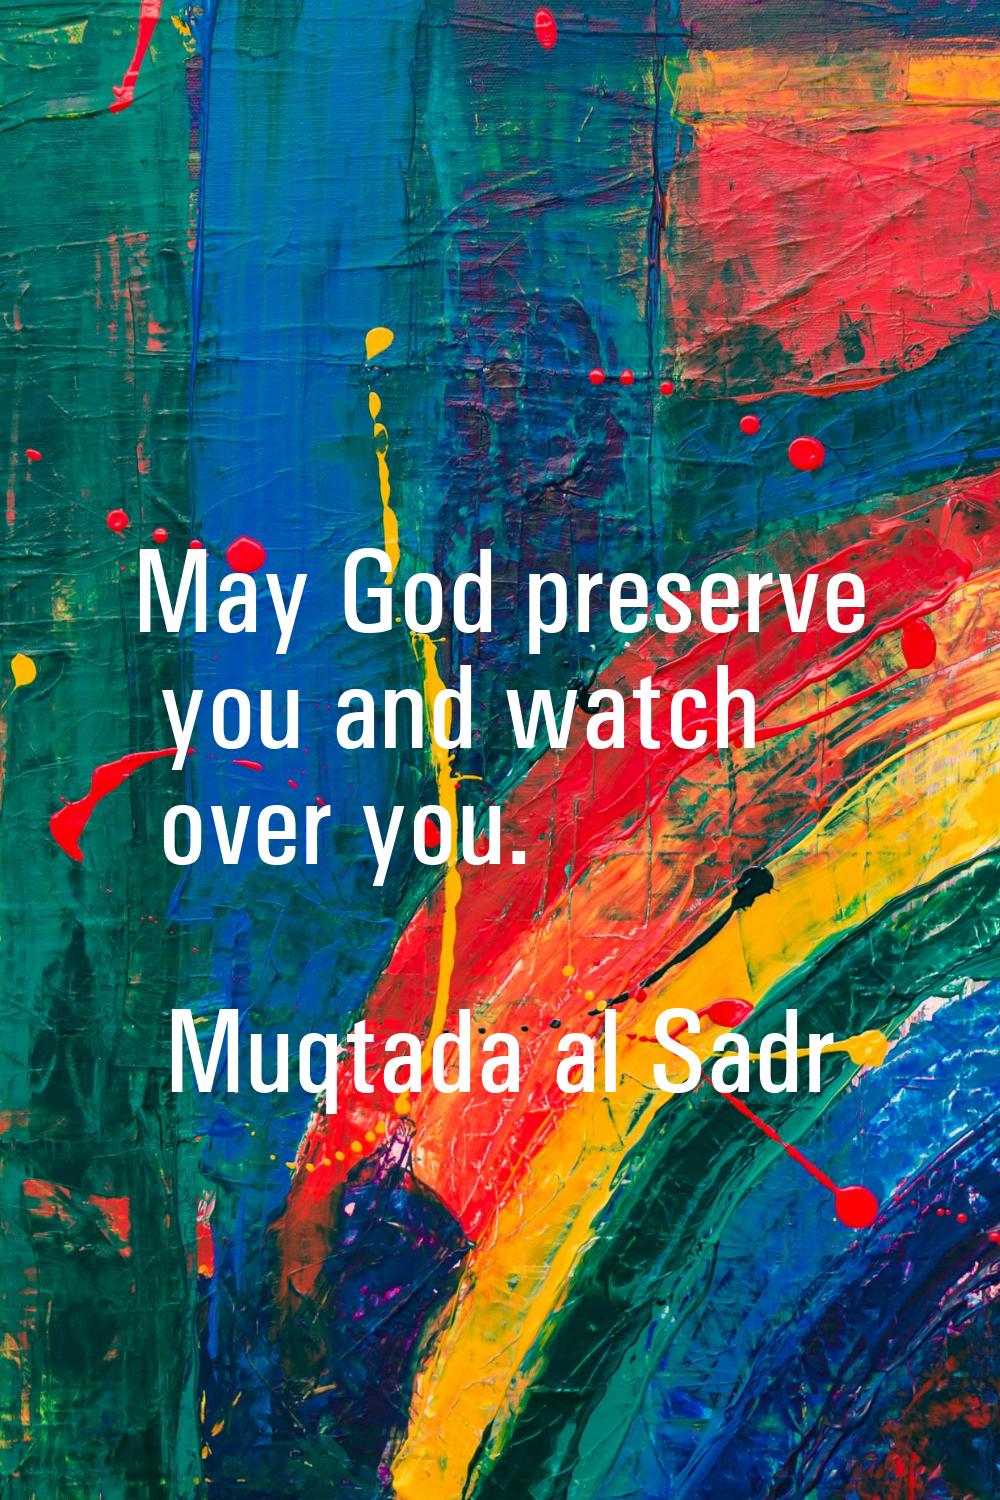 May God preserve you and watch over you.